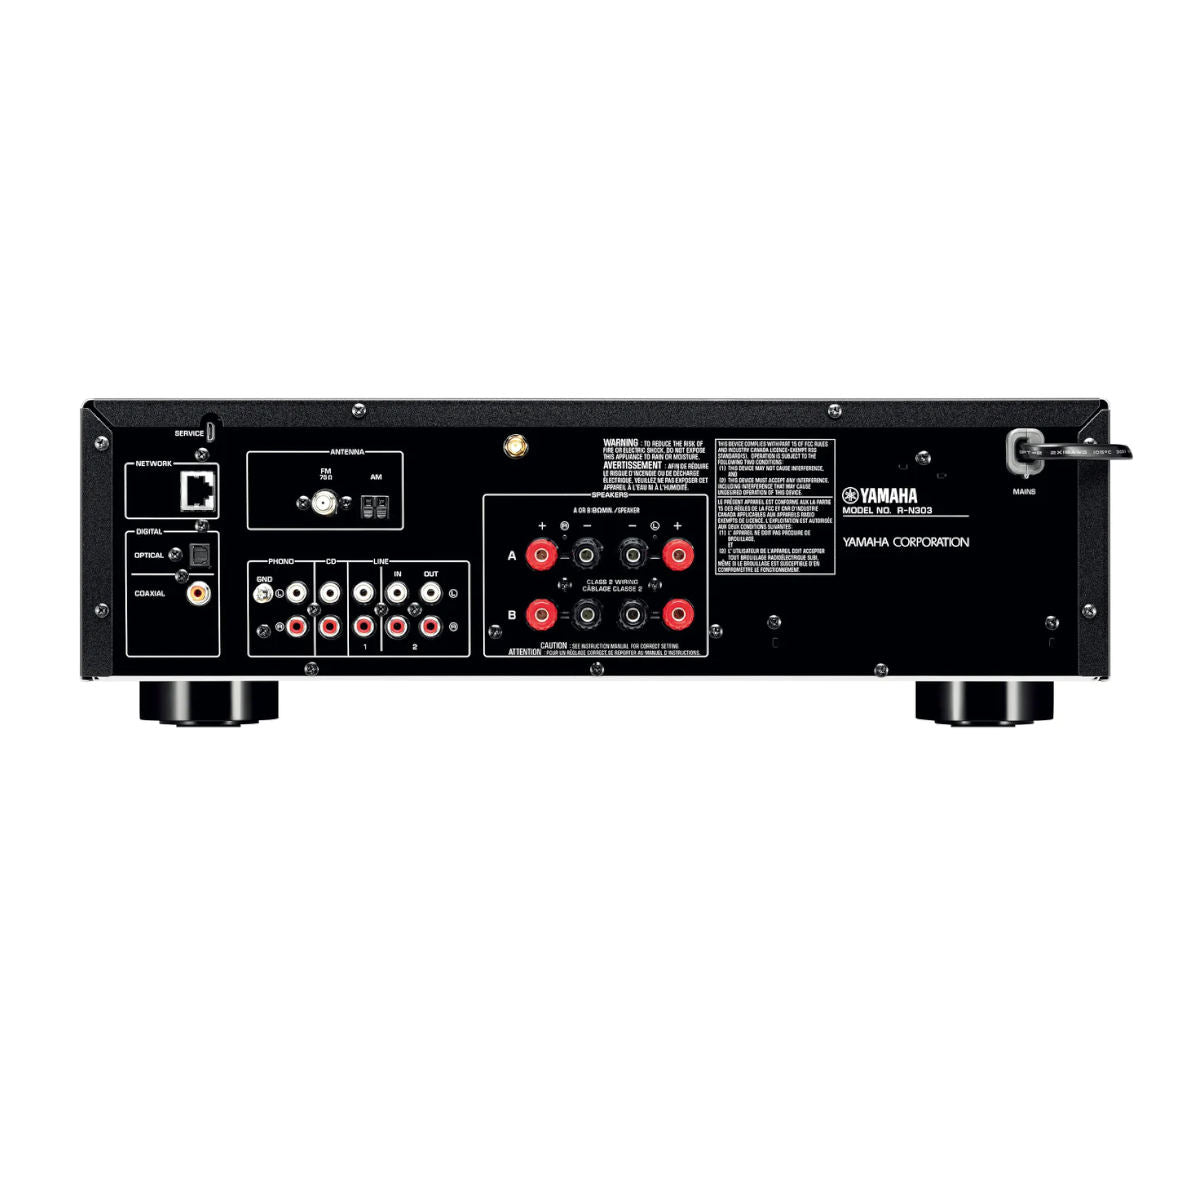 Yamaha R-N303 Network Stereo Receiver with Wi-Fi, Bluetooth and MusicCast